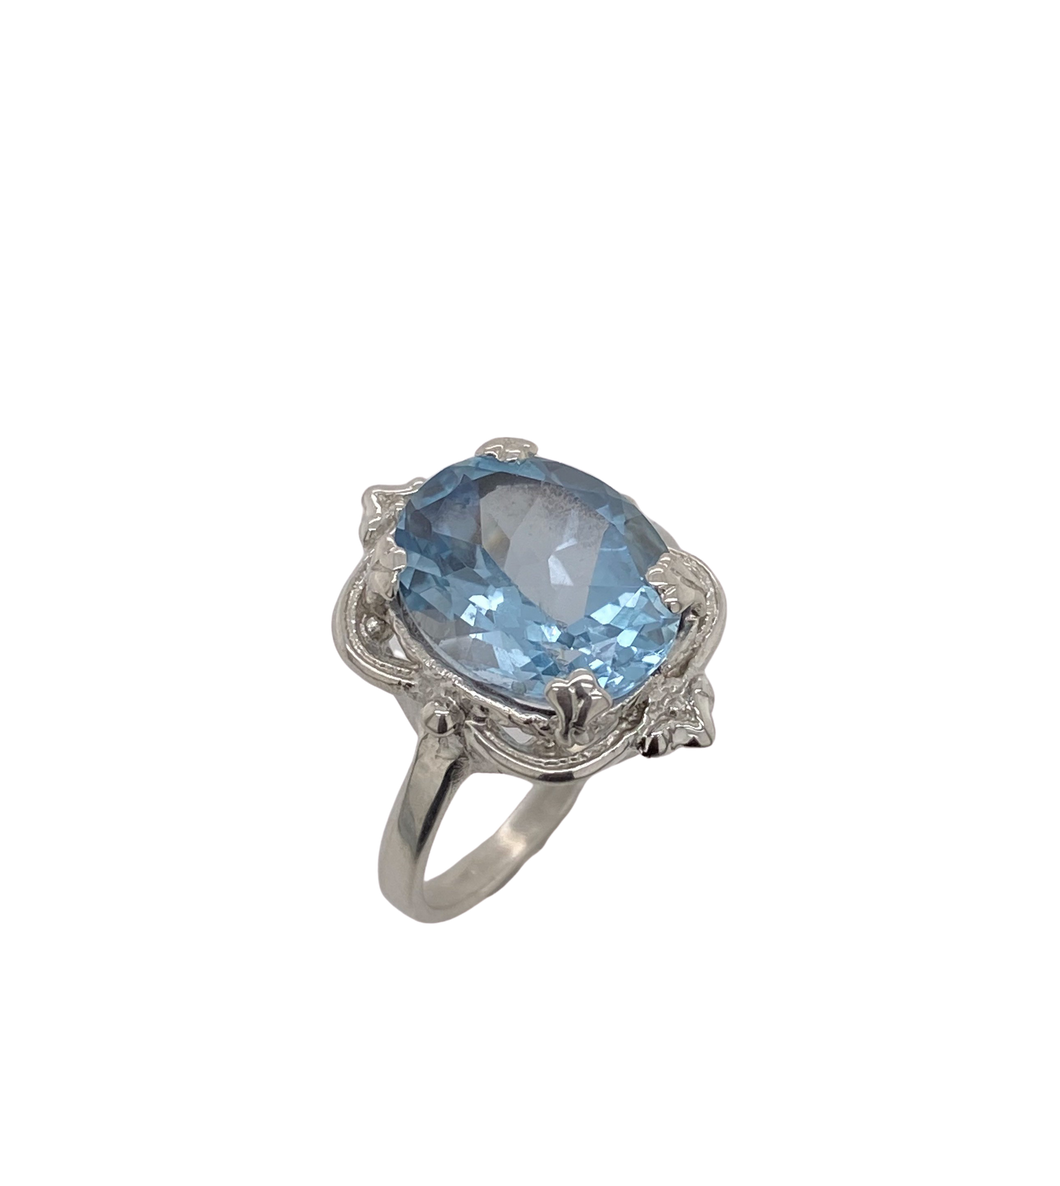 Sterling Silver and Gemstone Victorian Ring J385